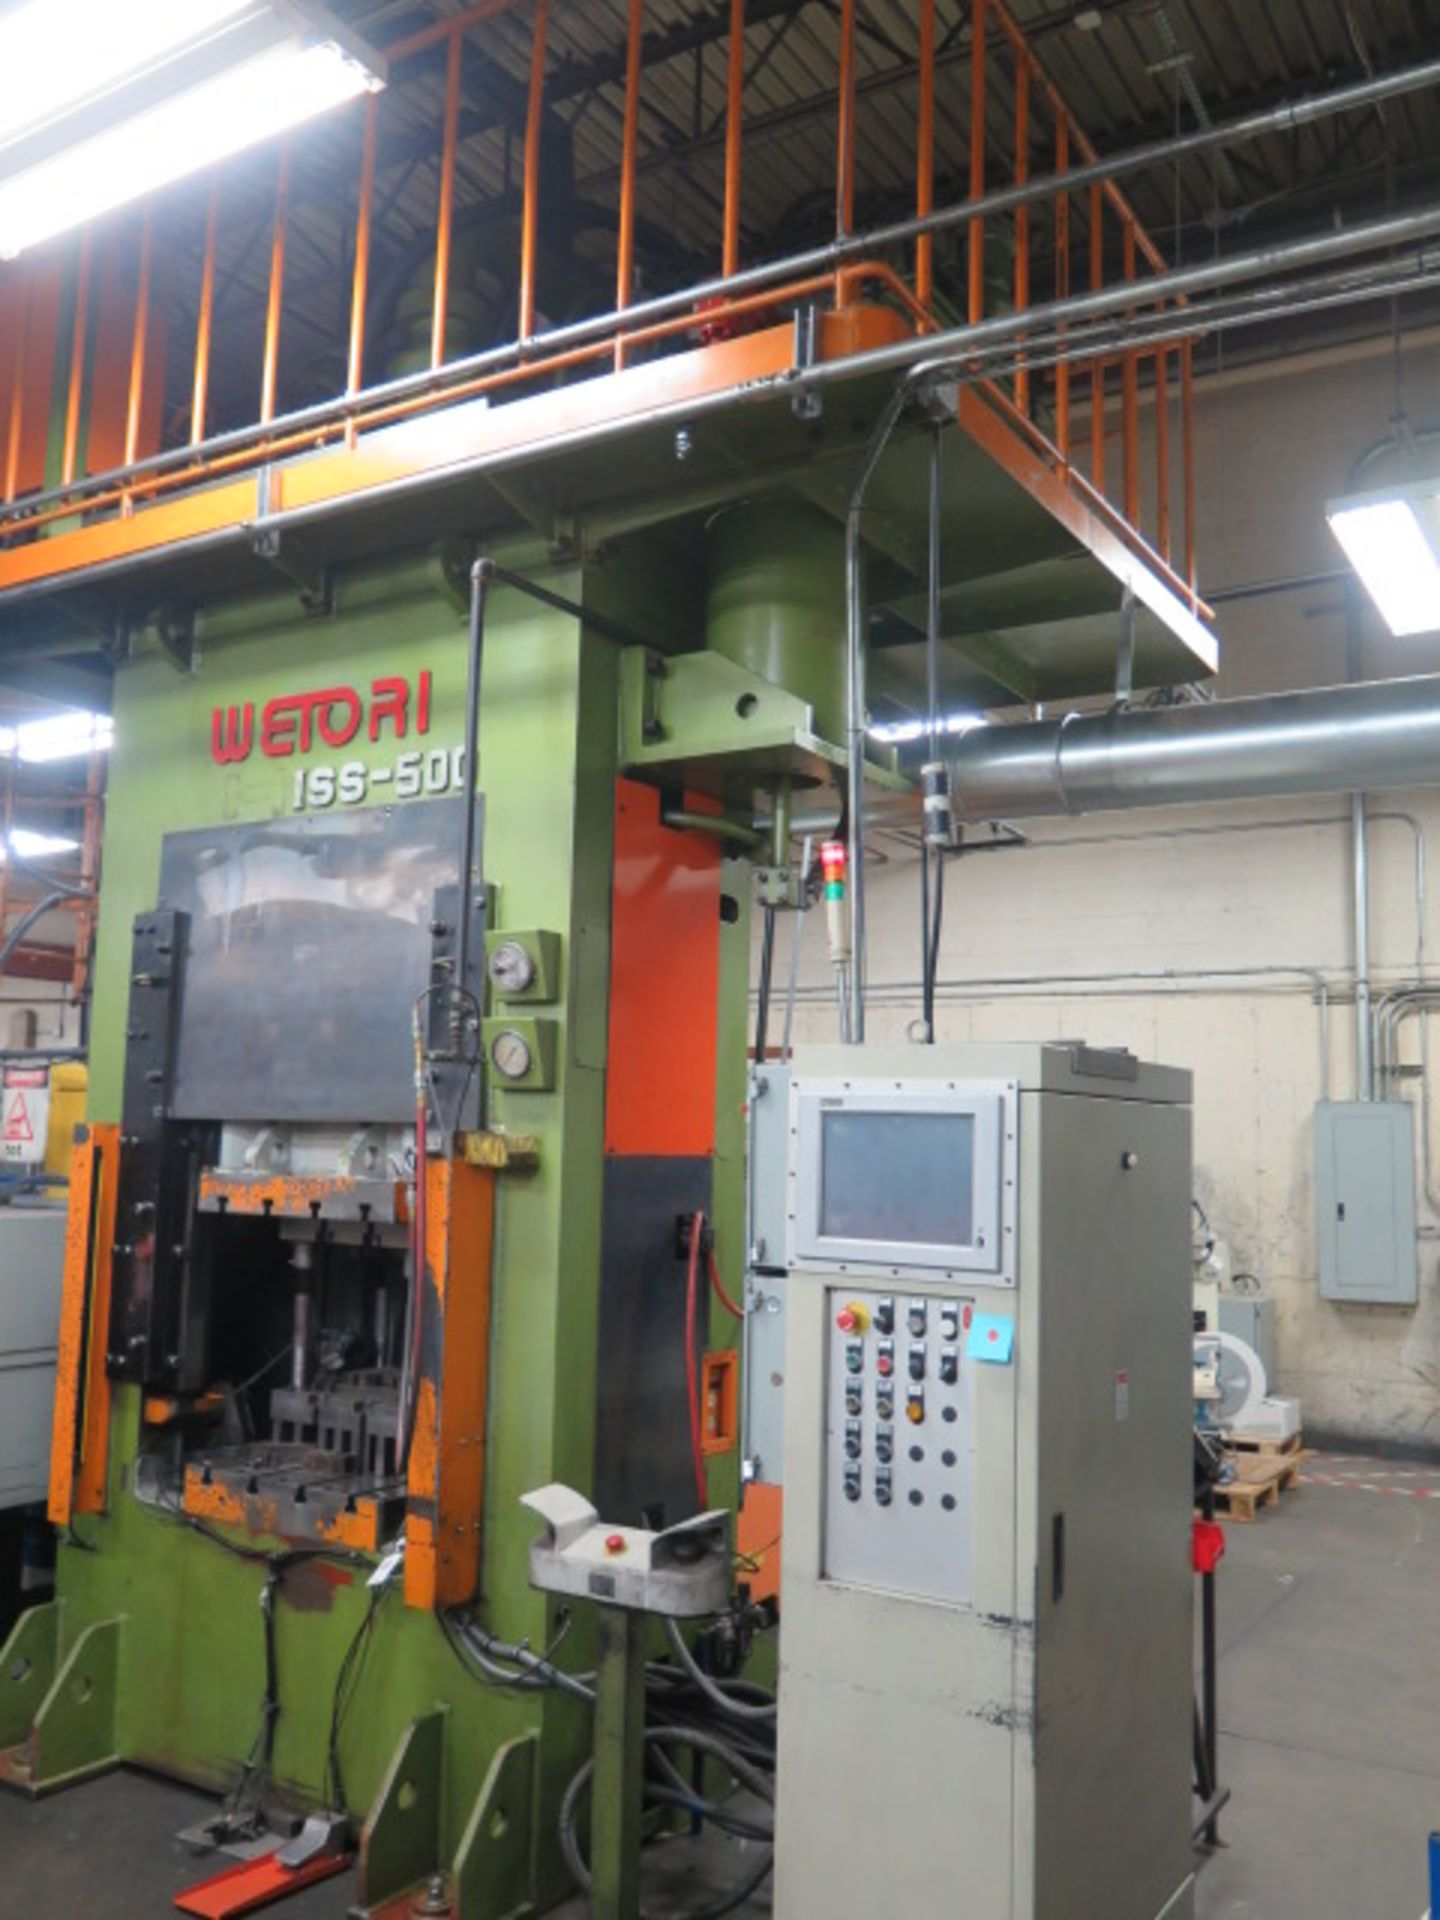 Wetori ISS-500 500 Ton Hot Forging Hydraulic Press w/ Phoenix Contact Touch Screen Cont, SOLD AS IS